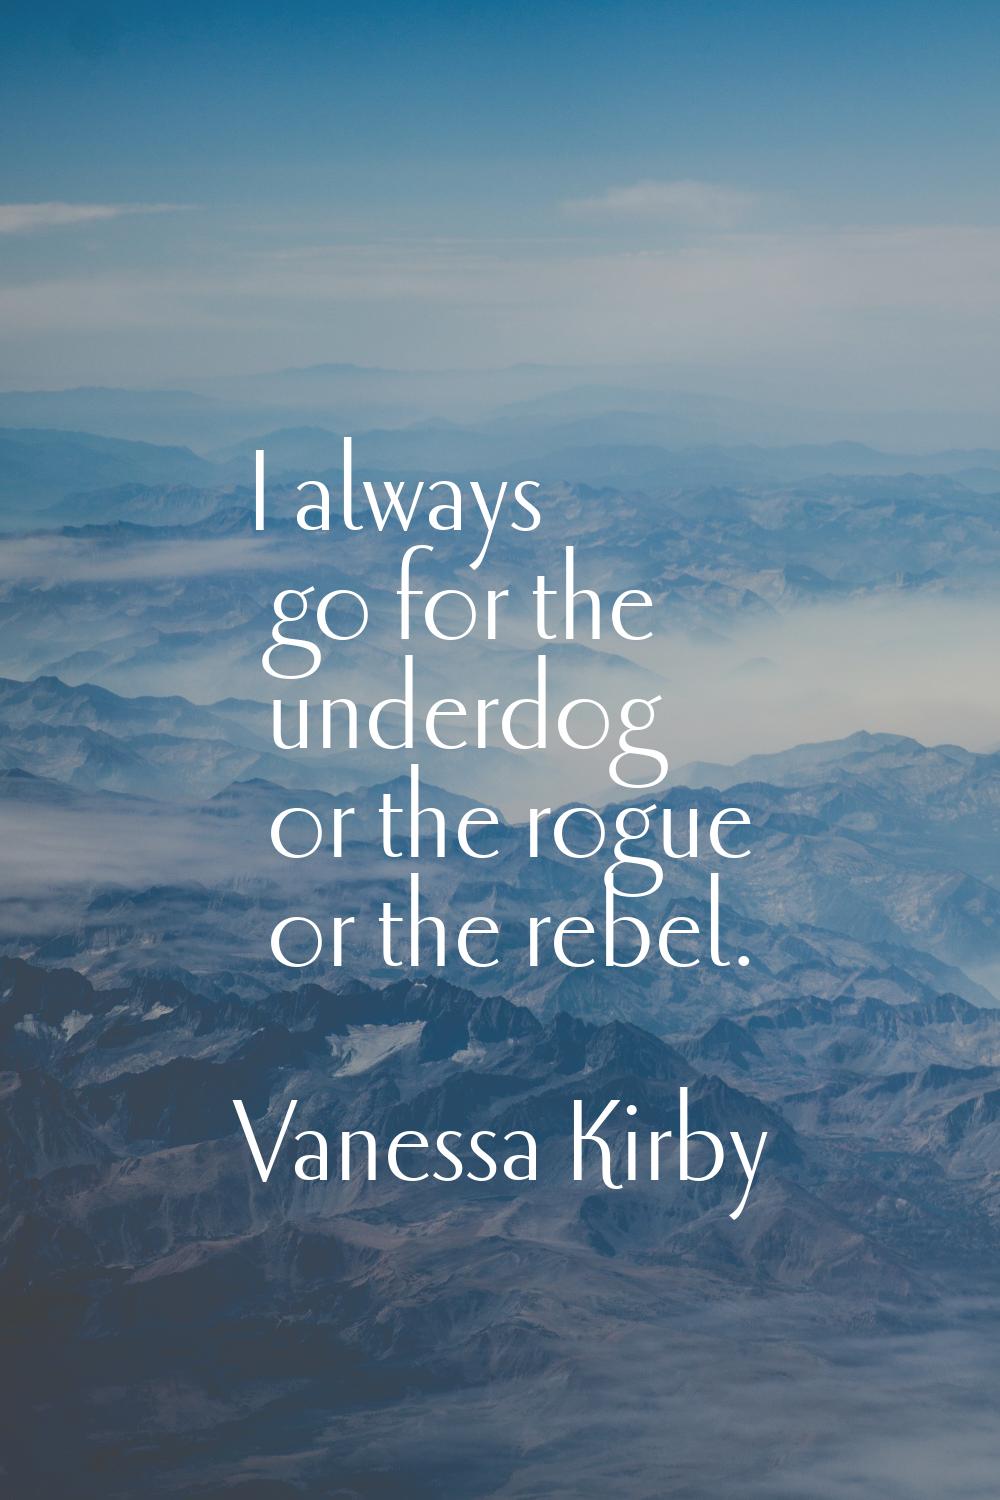 I always go for the underdog or the rogue or the rebel.